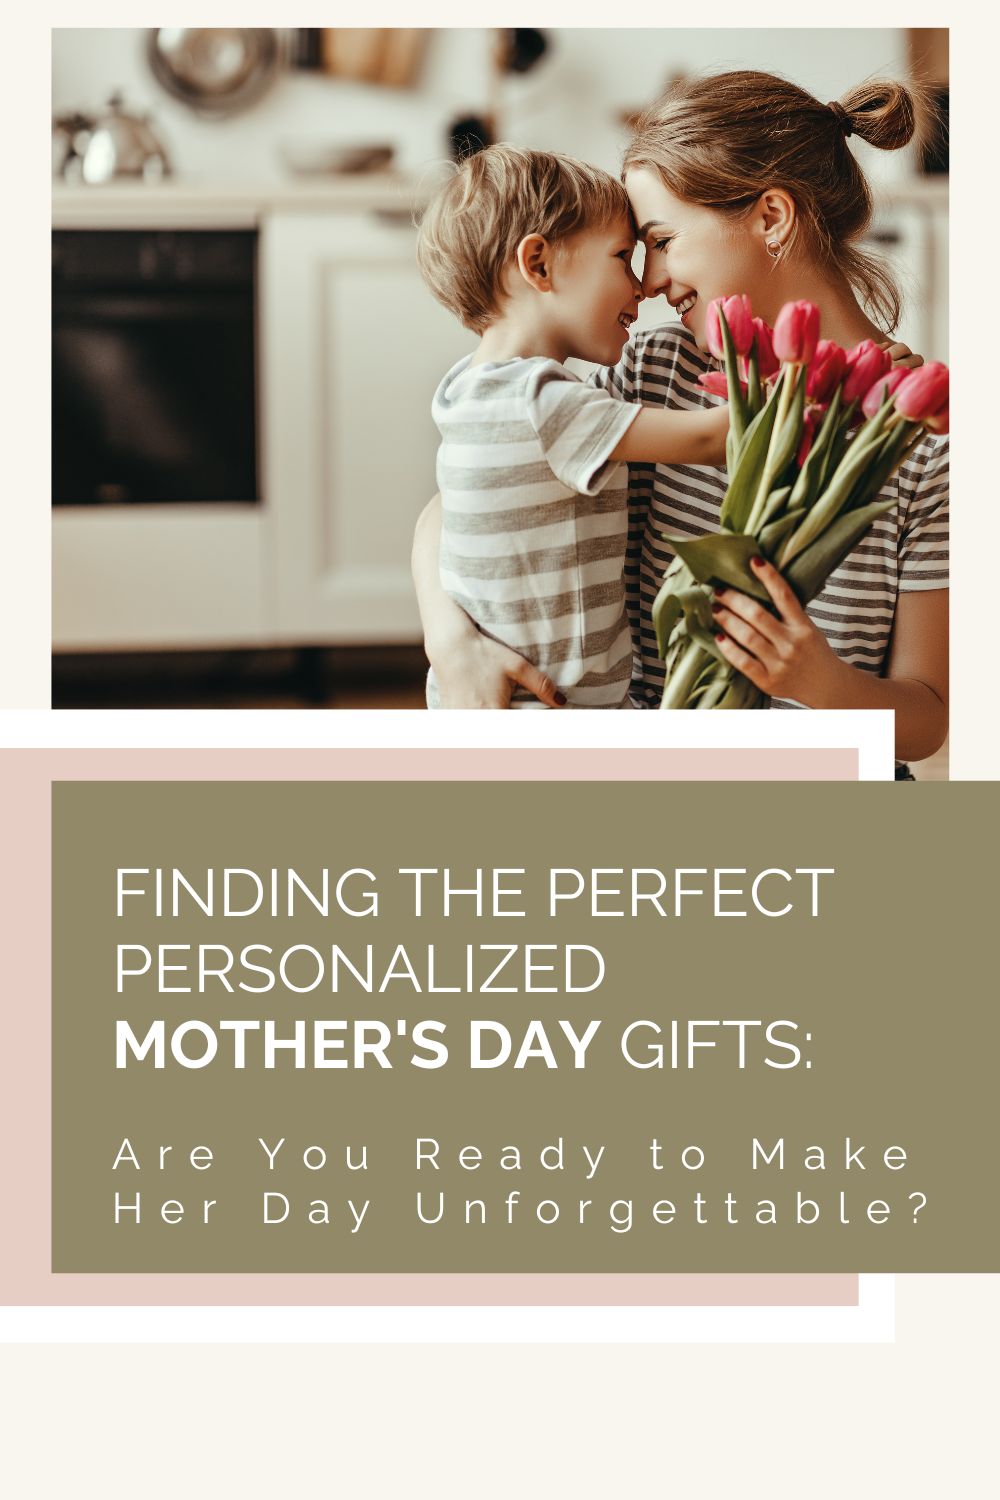 Best Gift for Mother's Day